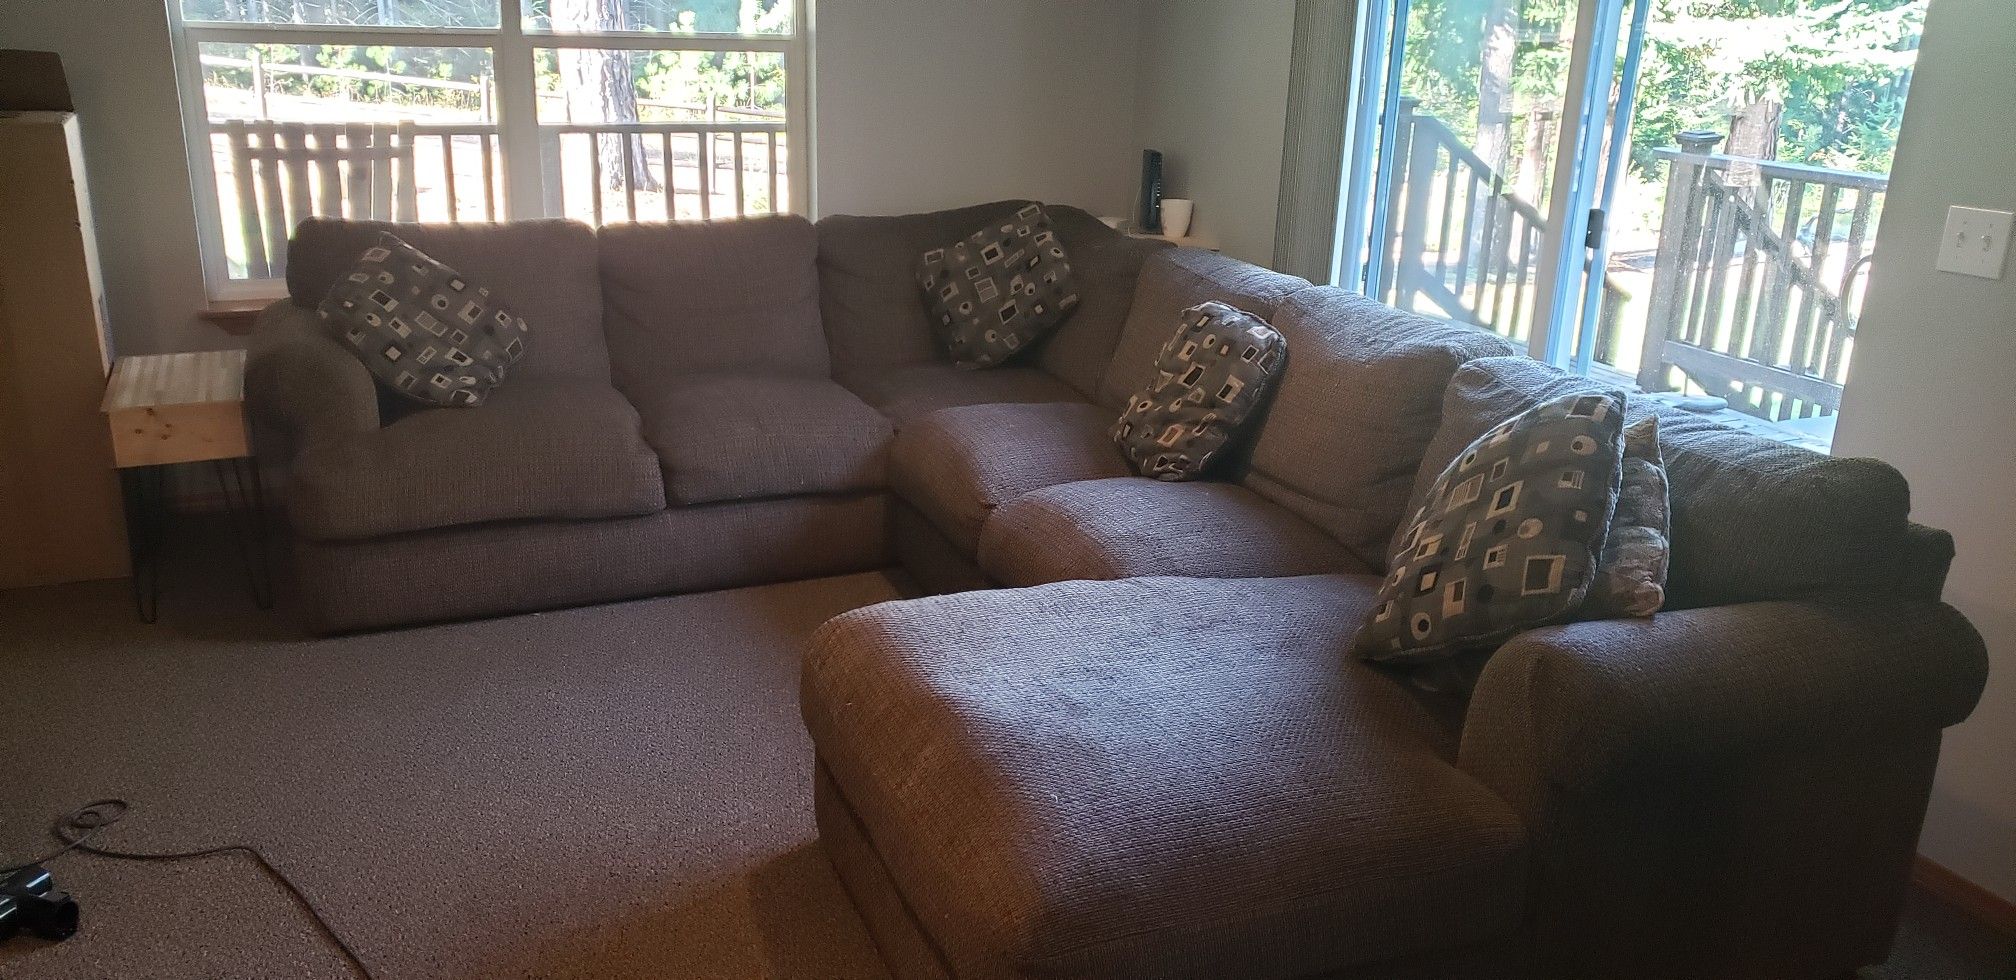 Extremely comfy goose down sectional couch